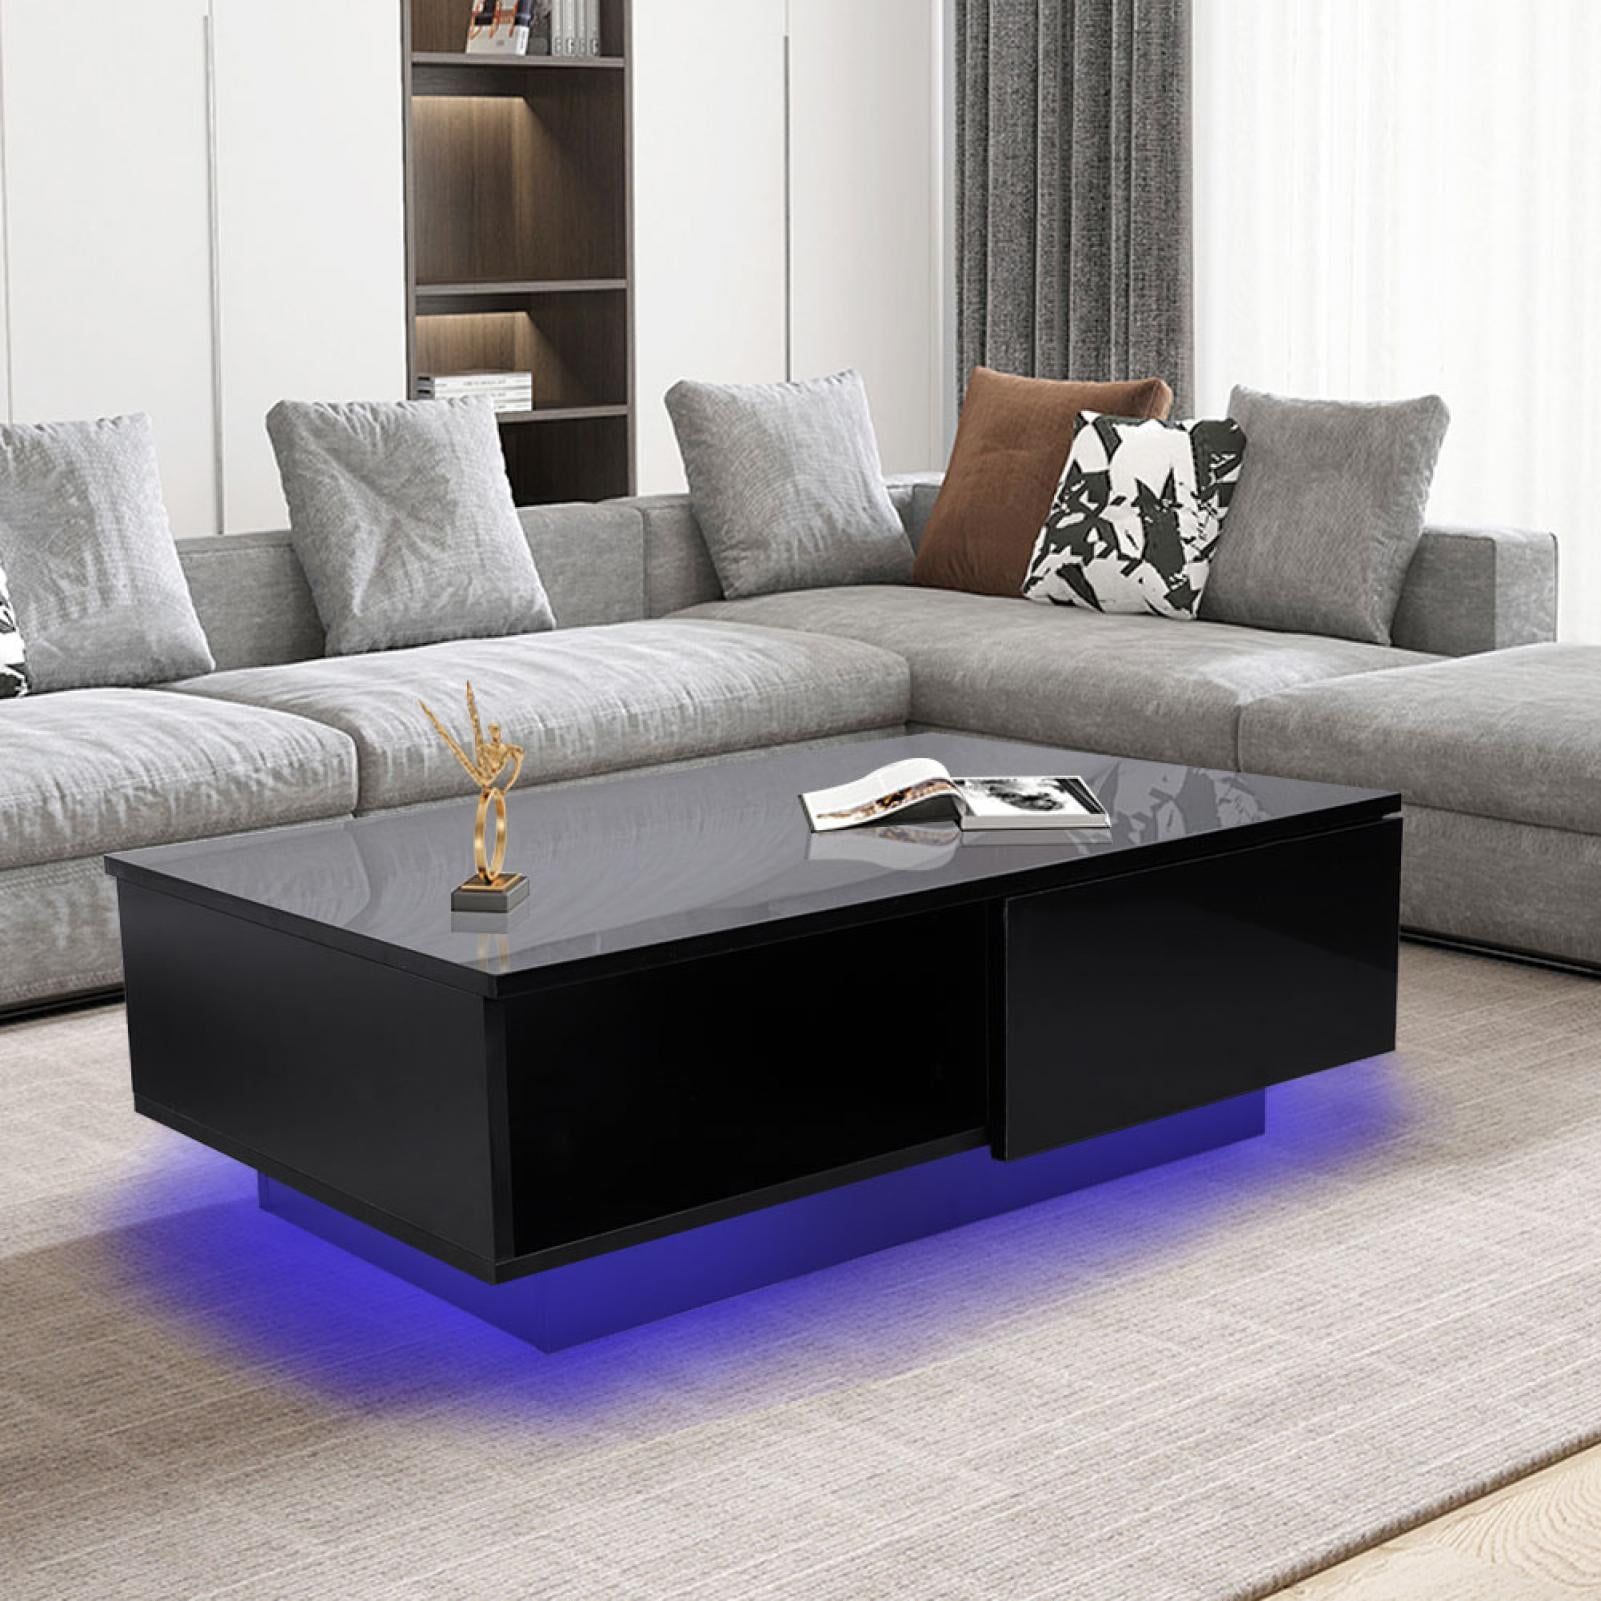 Ebtools Rectangle Led Coffee Table, Black Modern High Gloss Furniture Regarding Led Coffee Tables With 4 Drawers (View 8 of 15)